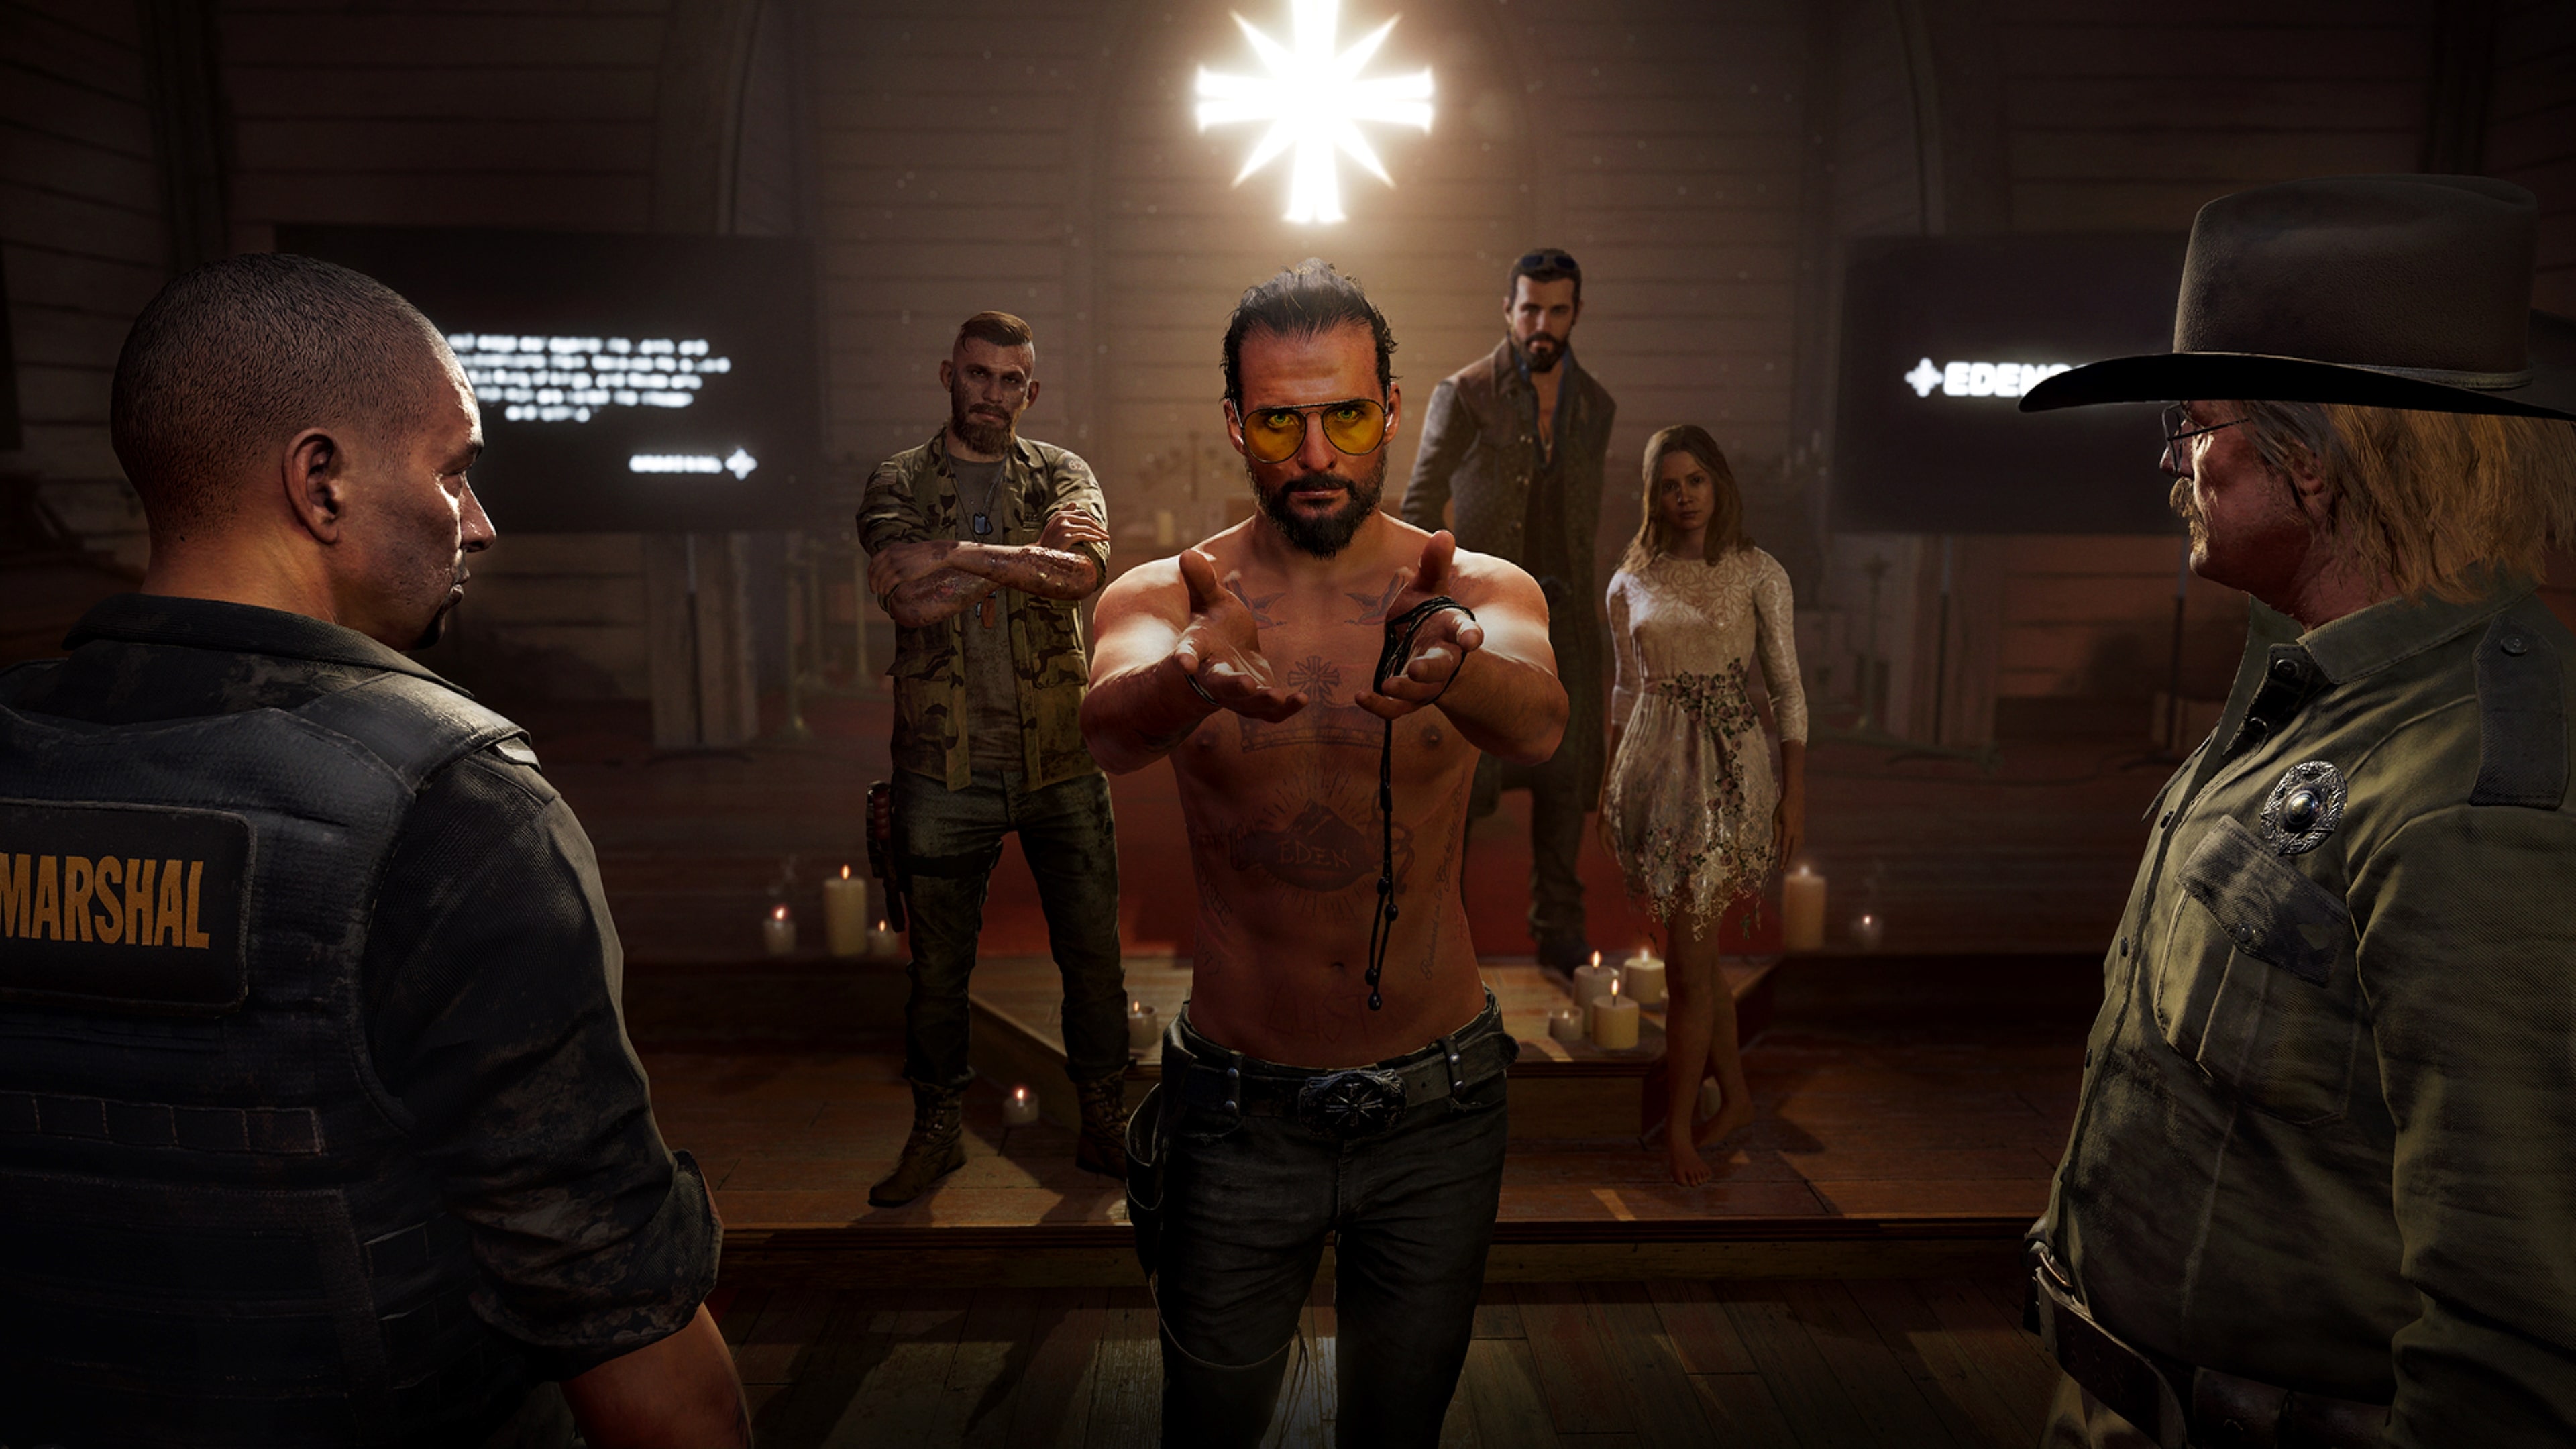 Far Cry 5 Gold Edition PS5